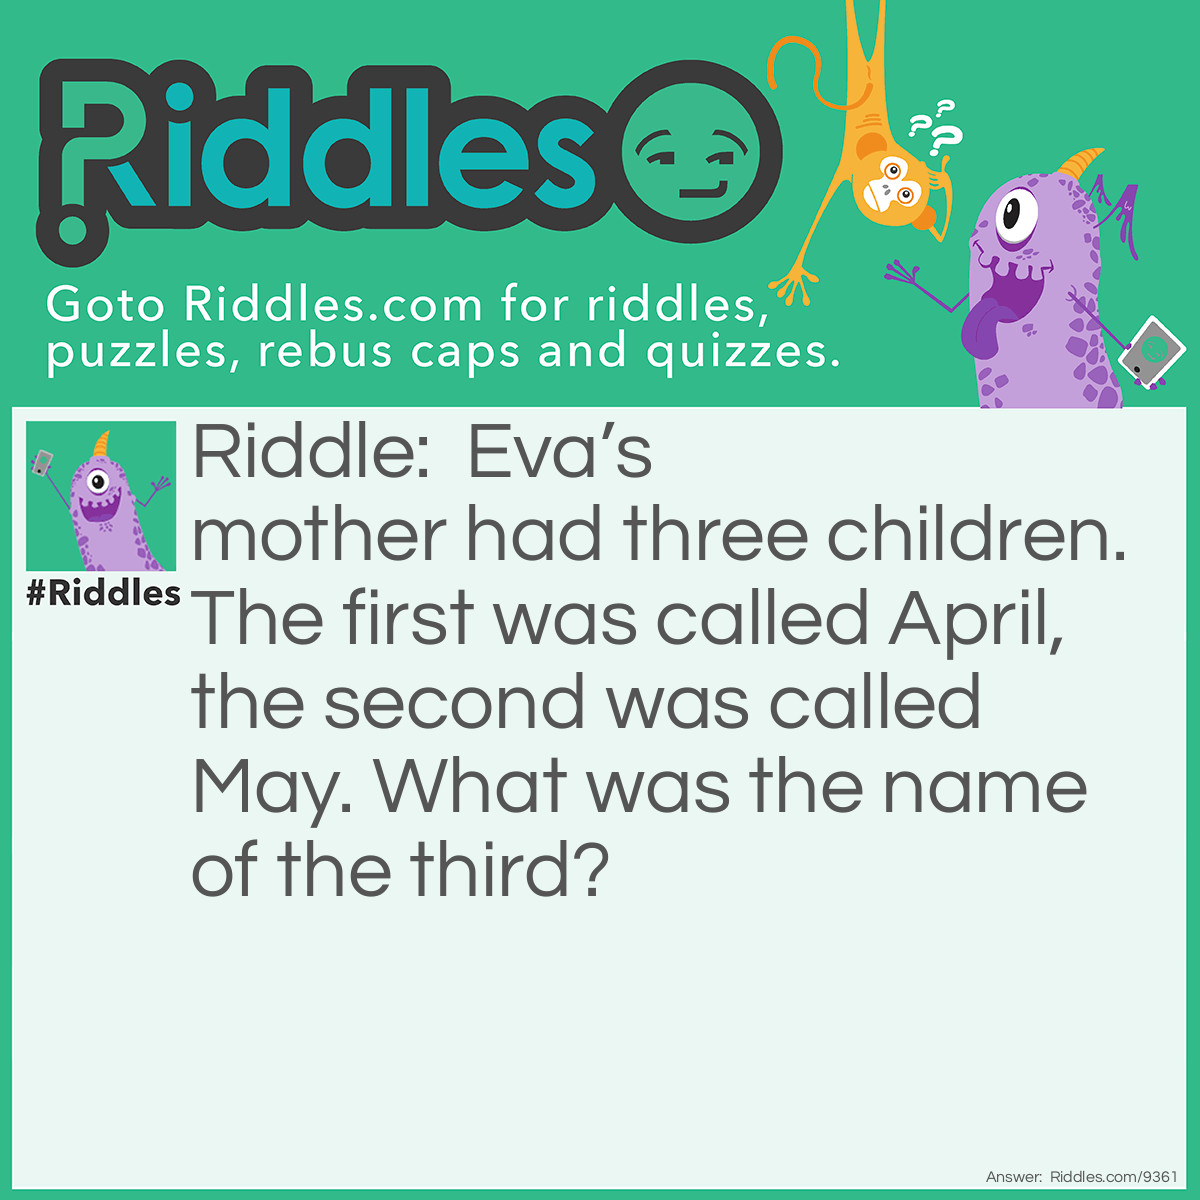 Riddle: Eva's mother had three children. The first was called April, the second was called May. What was the name of the third? Answer: Eva.